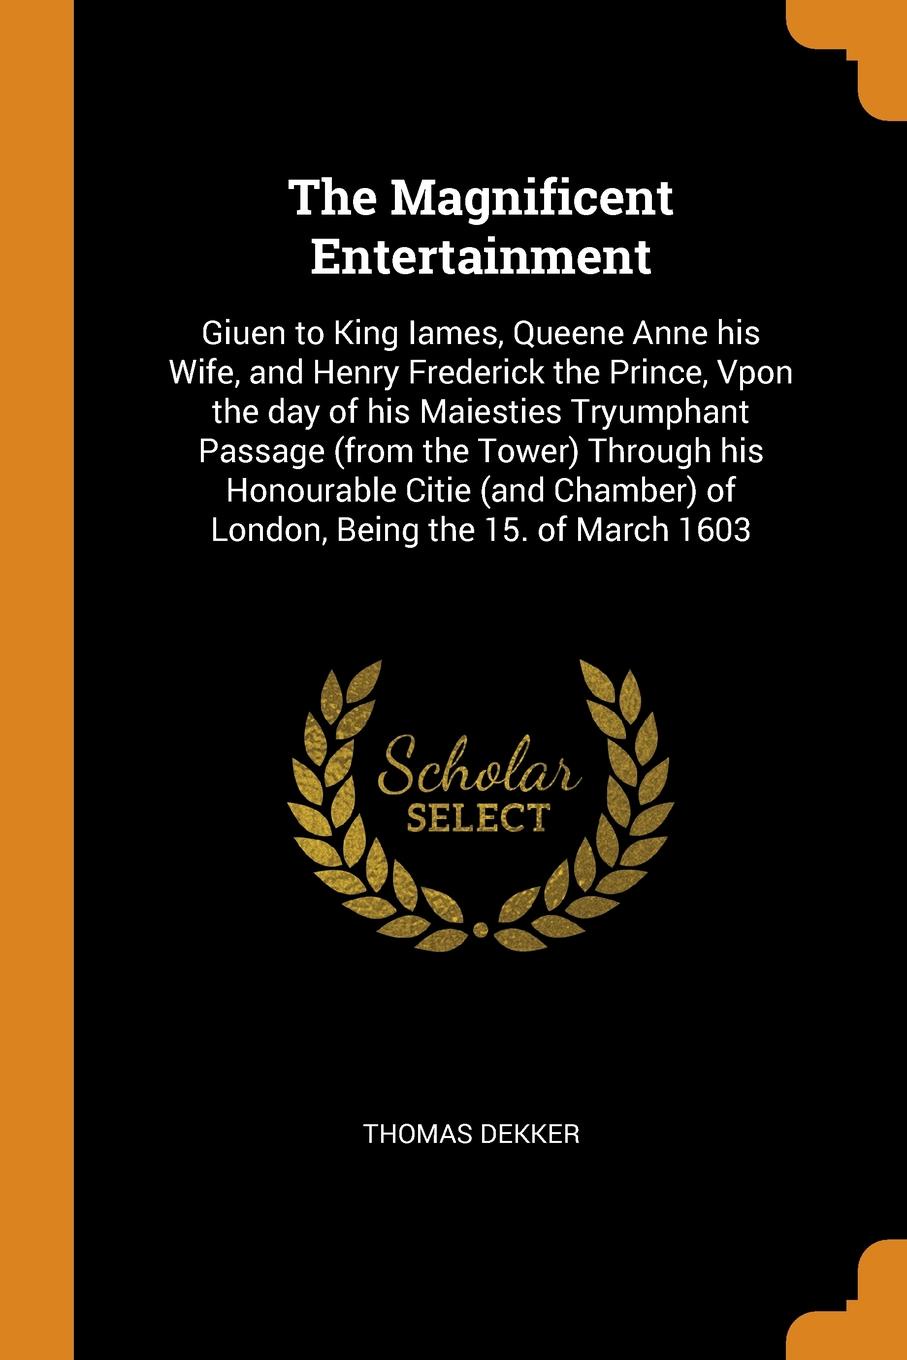 The Magnificent Entertainment. Giuen to King Iames, Queene Anne his Wife, and Henry Frederick the Prince, Vpon the day of his Maiesties Tryumphant Passage (from the Tower) Through his Honourable Citie (and Chamber) of London, Being the 15. of Marc...